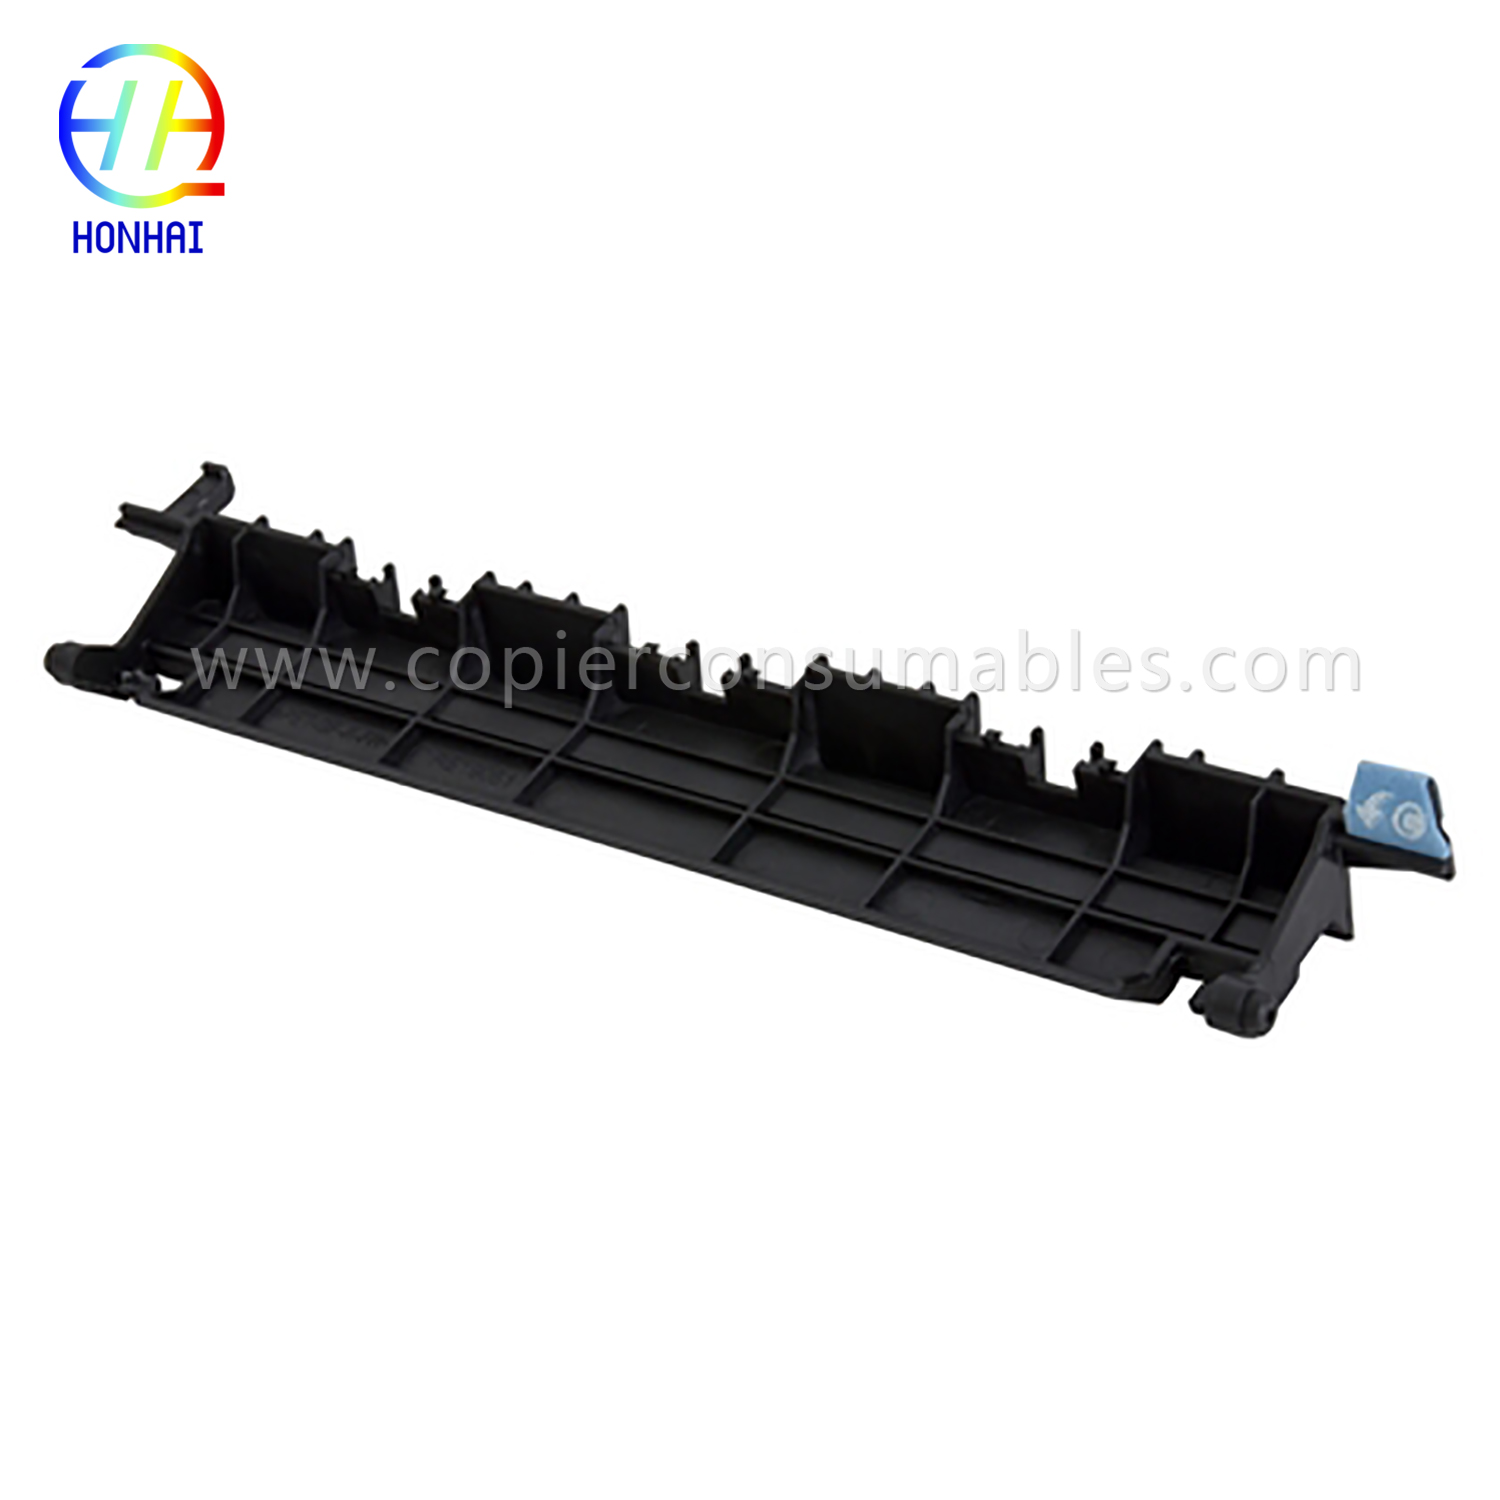 Ricoh M0264291 အတွက် Fuser Exit Guide Plate